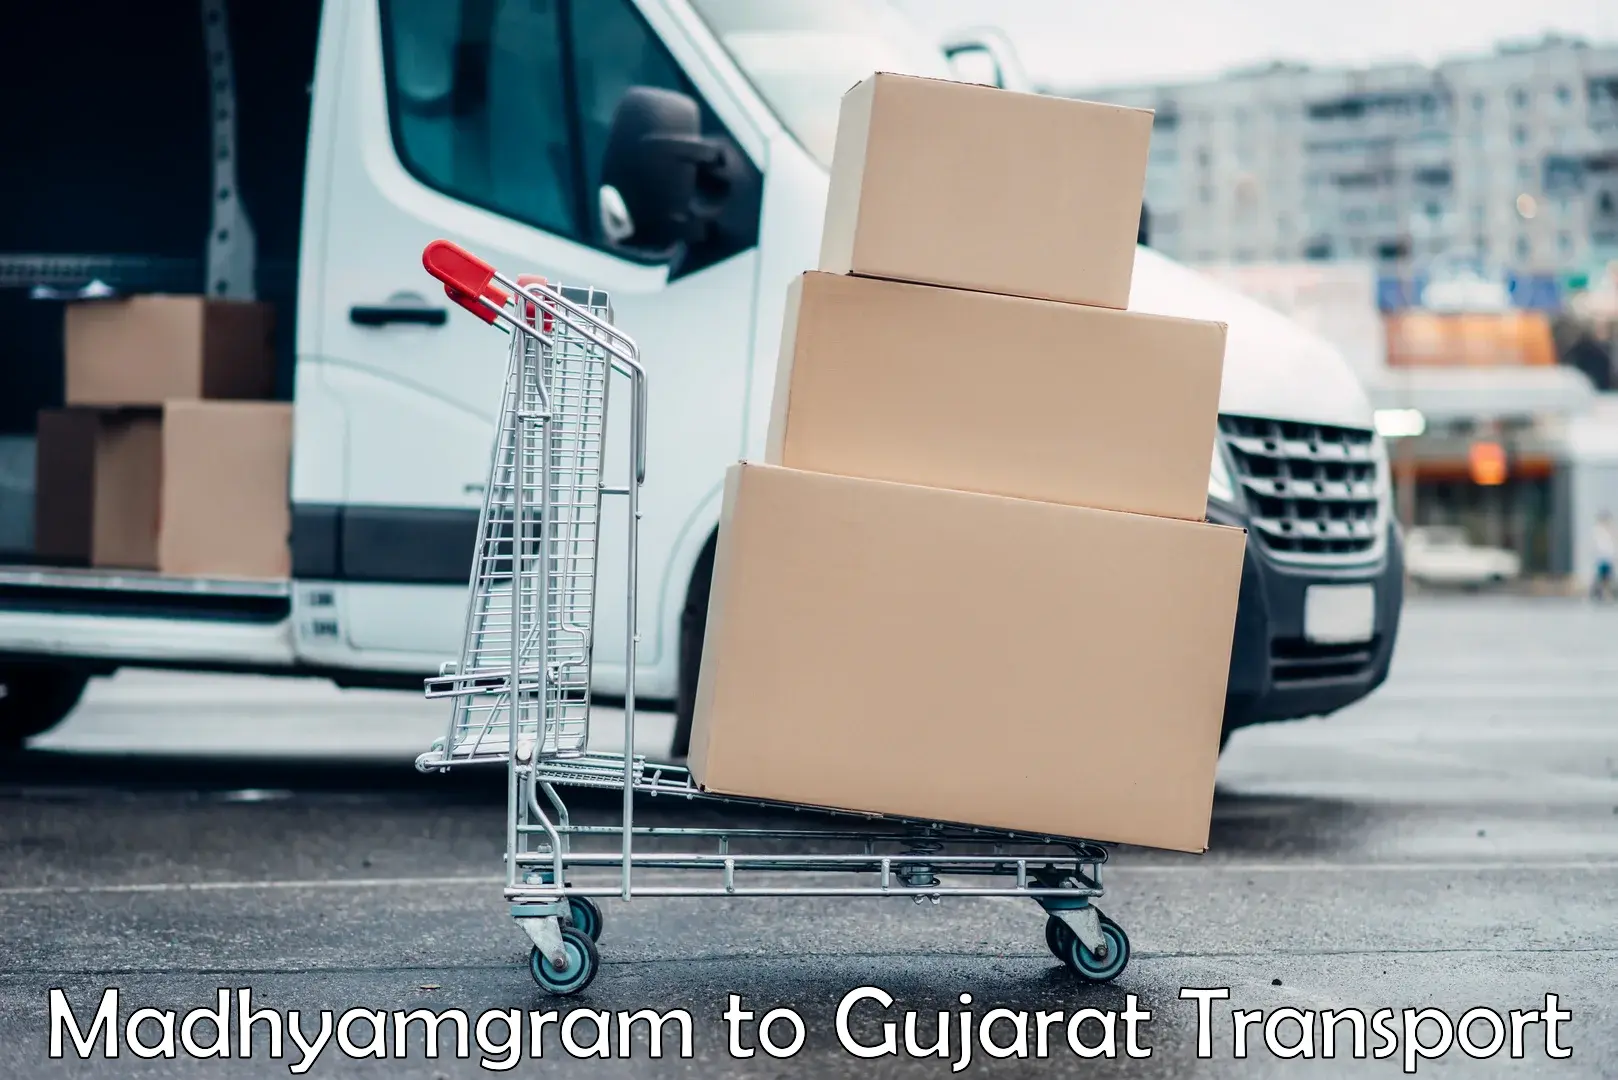 Nationwide transport services Madhyamgram to GIDC